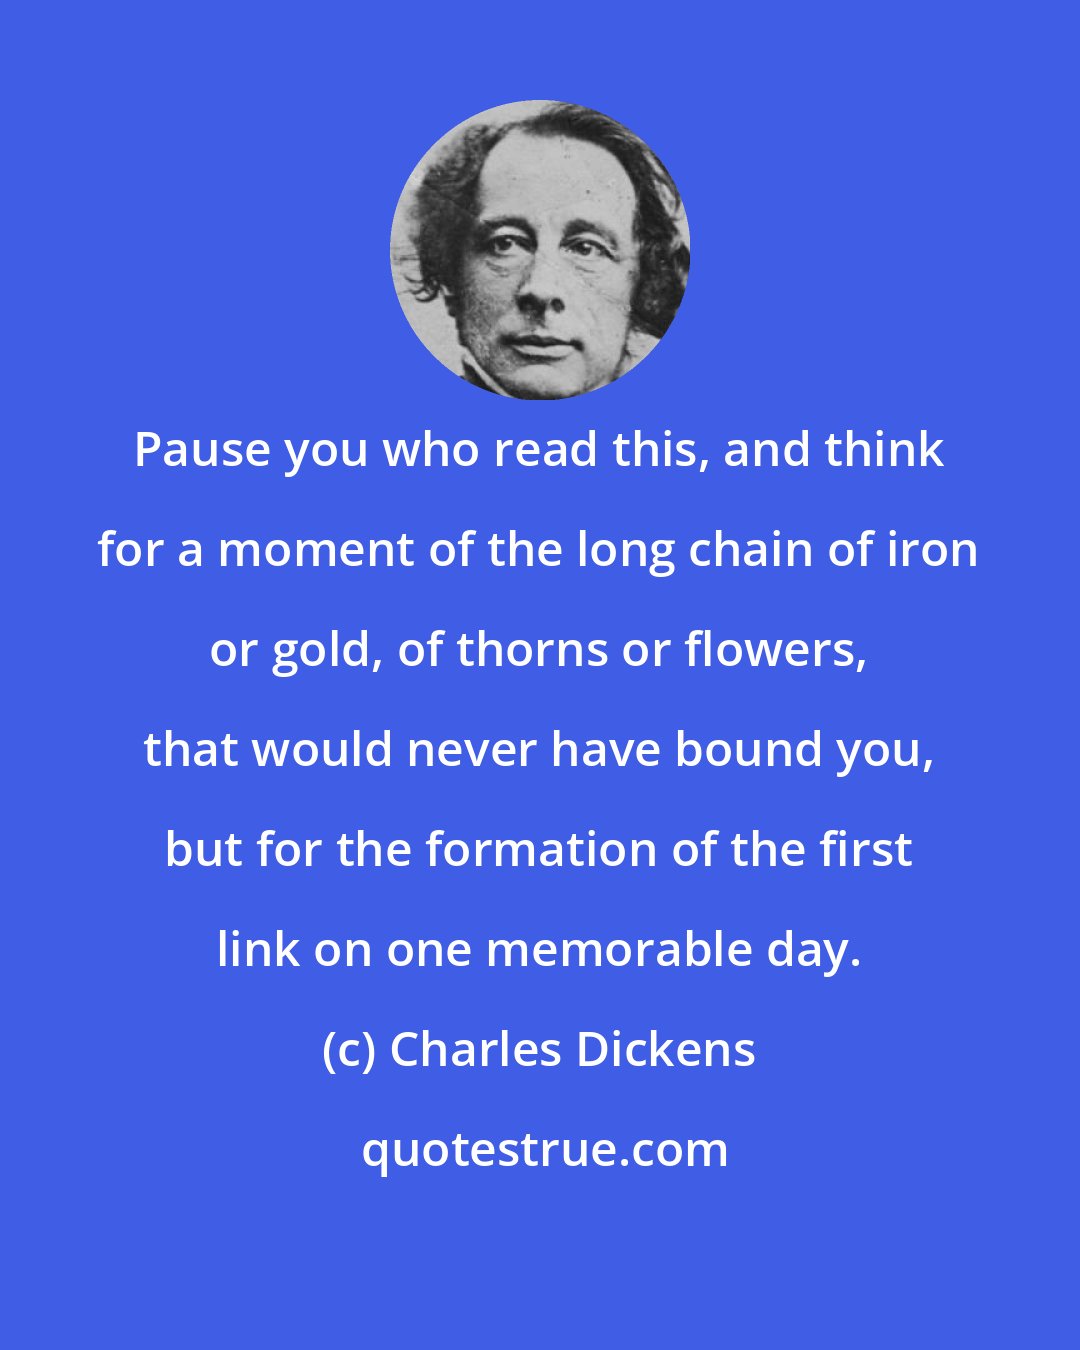 Charles Dickens: Pause you who read this, and think for a moment of the long chain of iron or gold, of thorns or flowers, that would never have bound you, but for the formation of the first link on one memorable day.